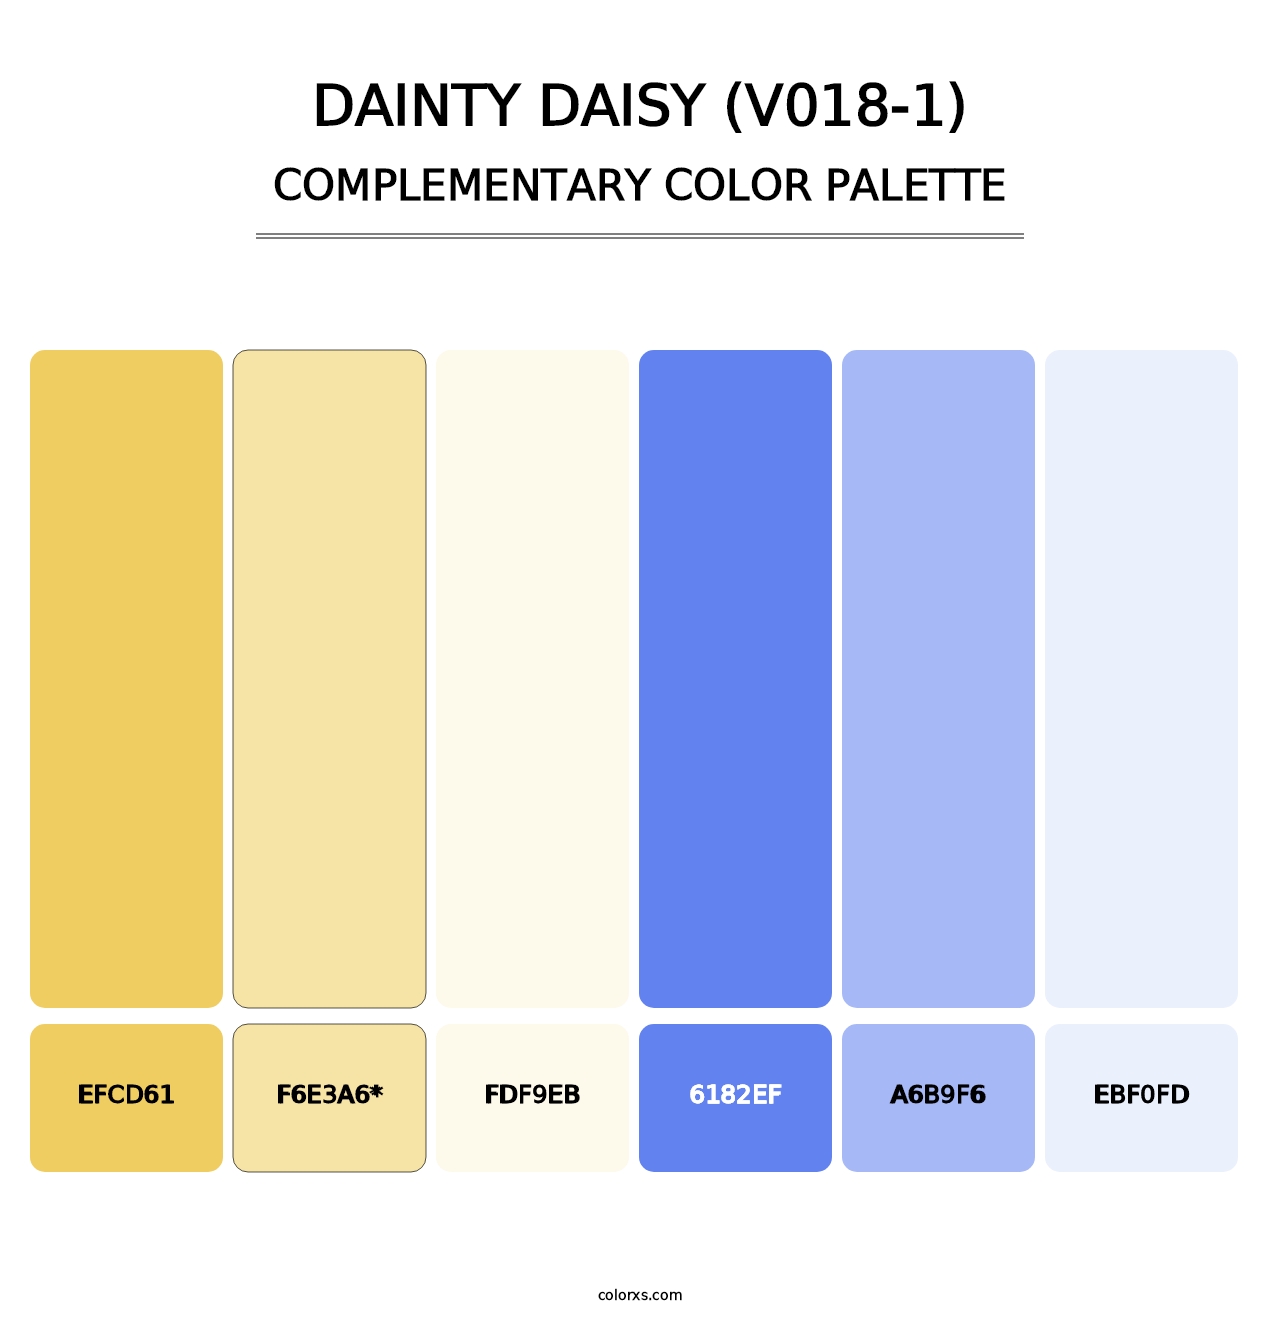 Dainty Daisy (V018-1) - Complementary Color Palette